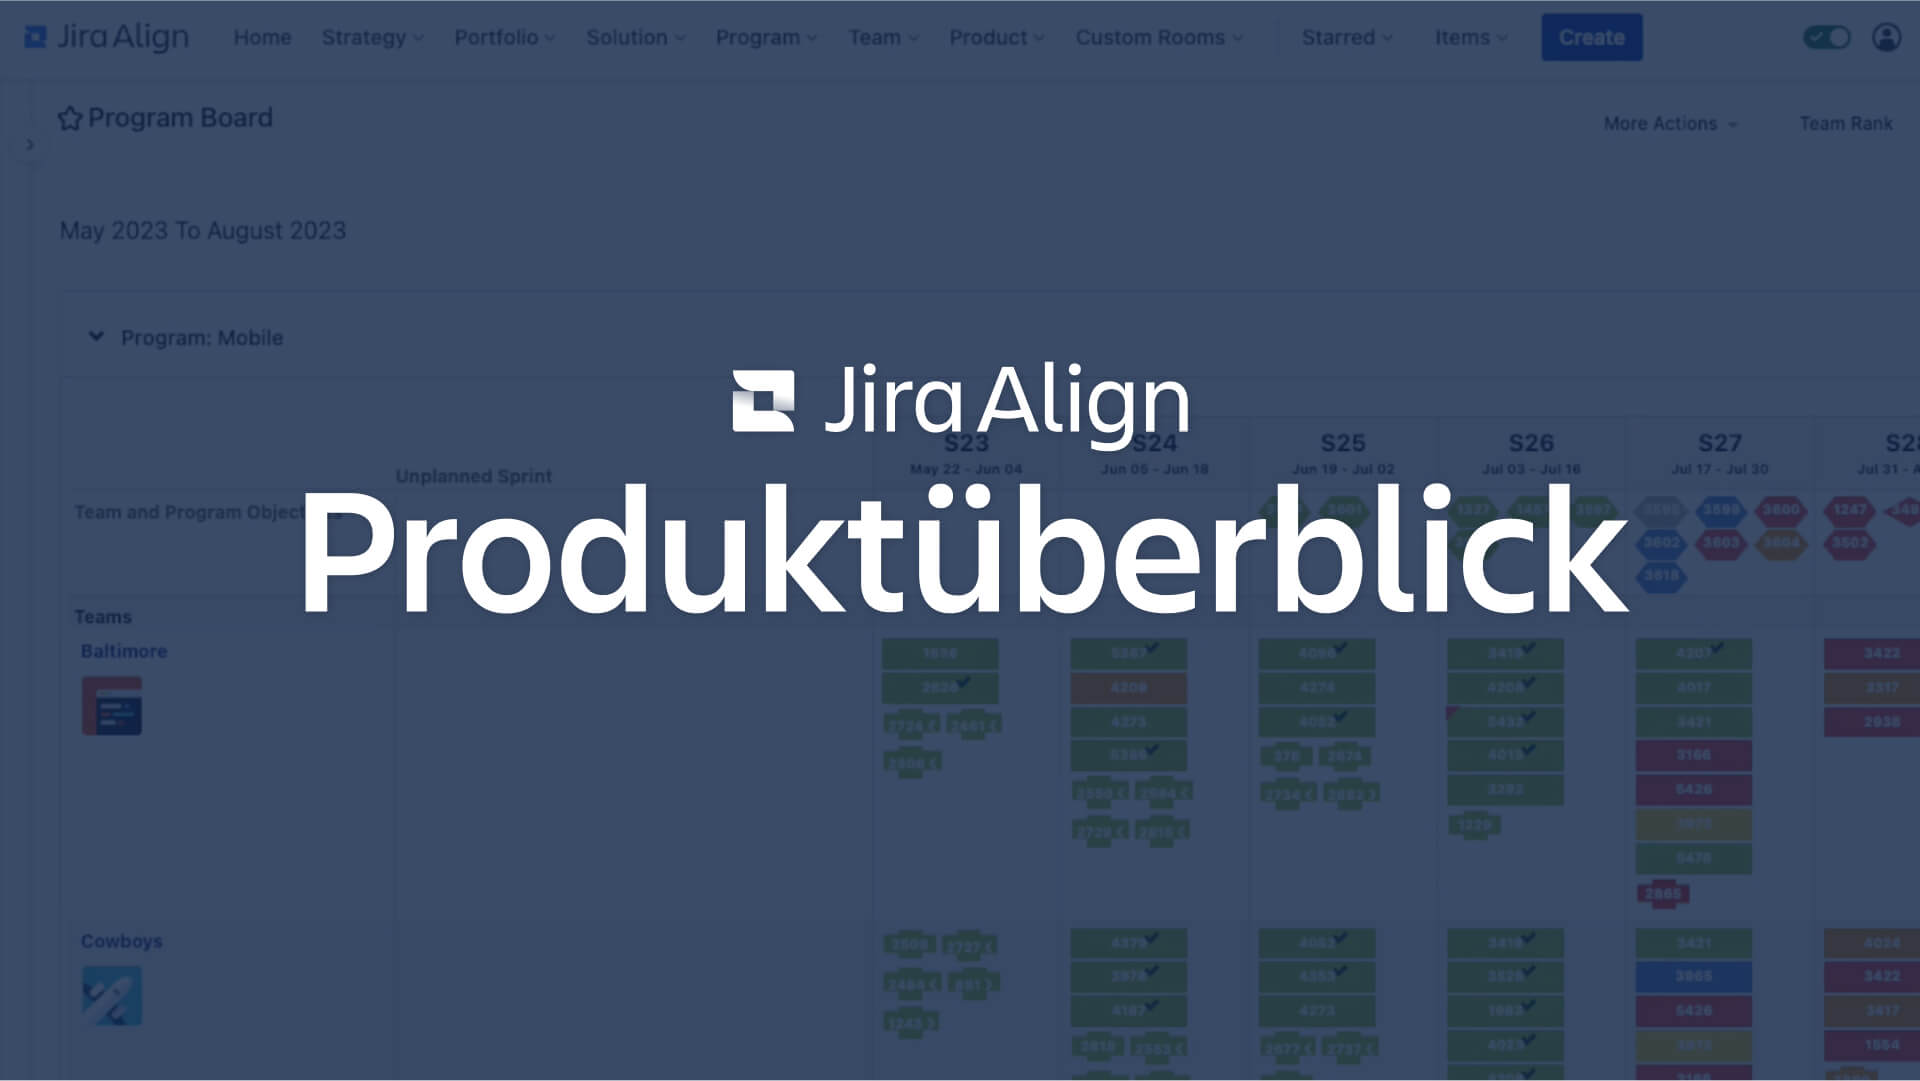 Jira Align Product Overview screen